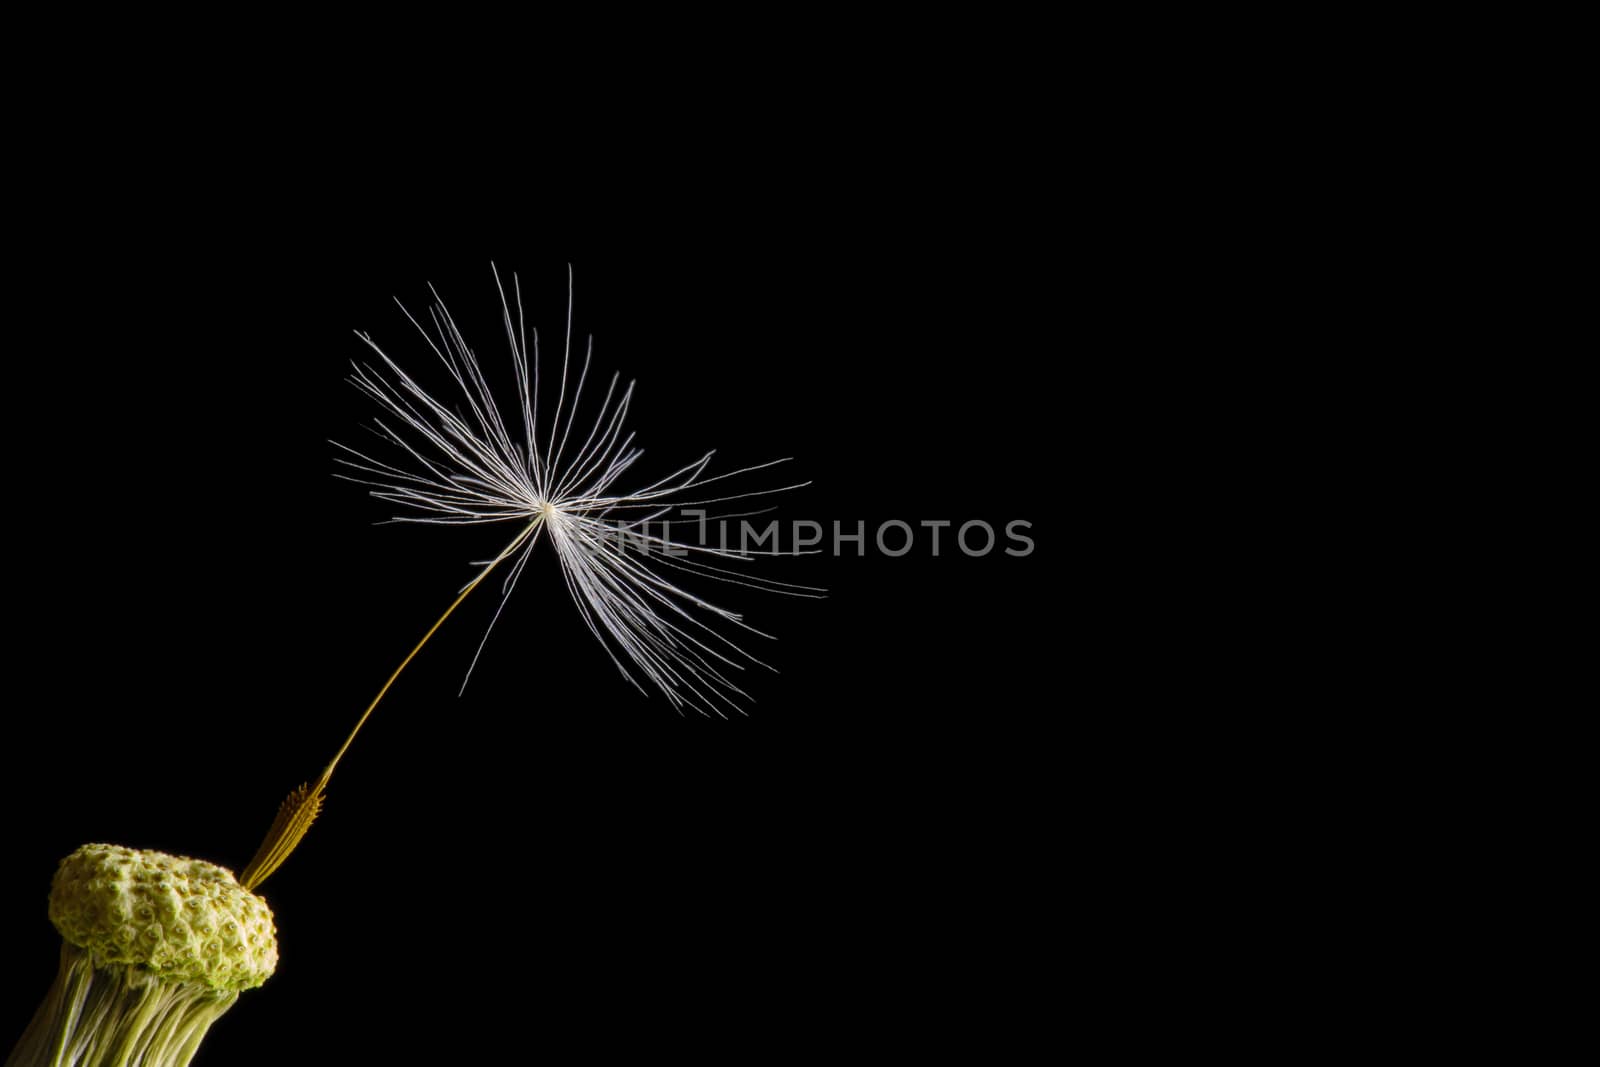 close-up of a dandelion with one seed left